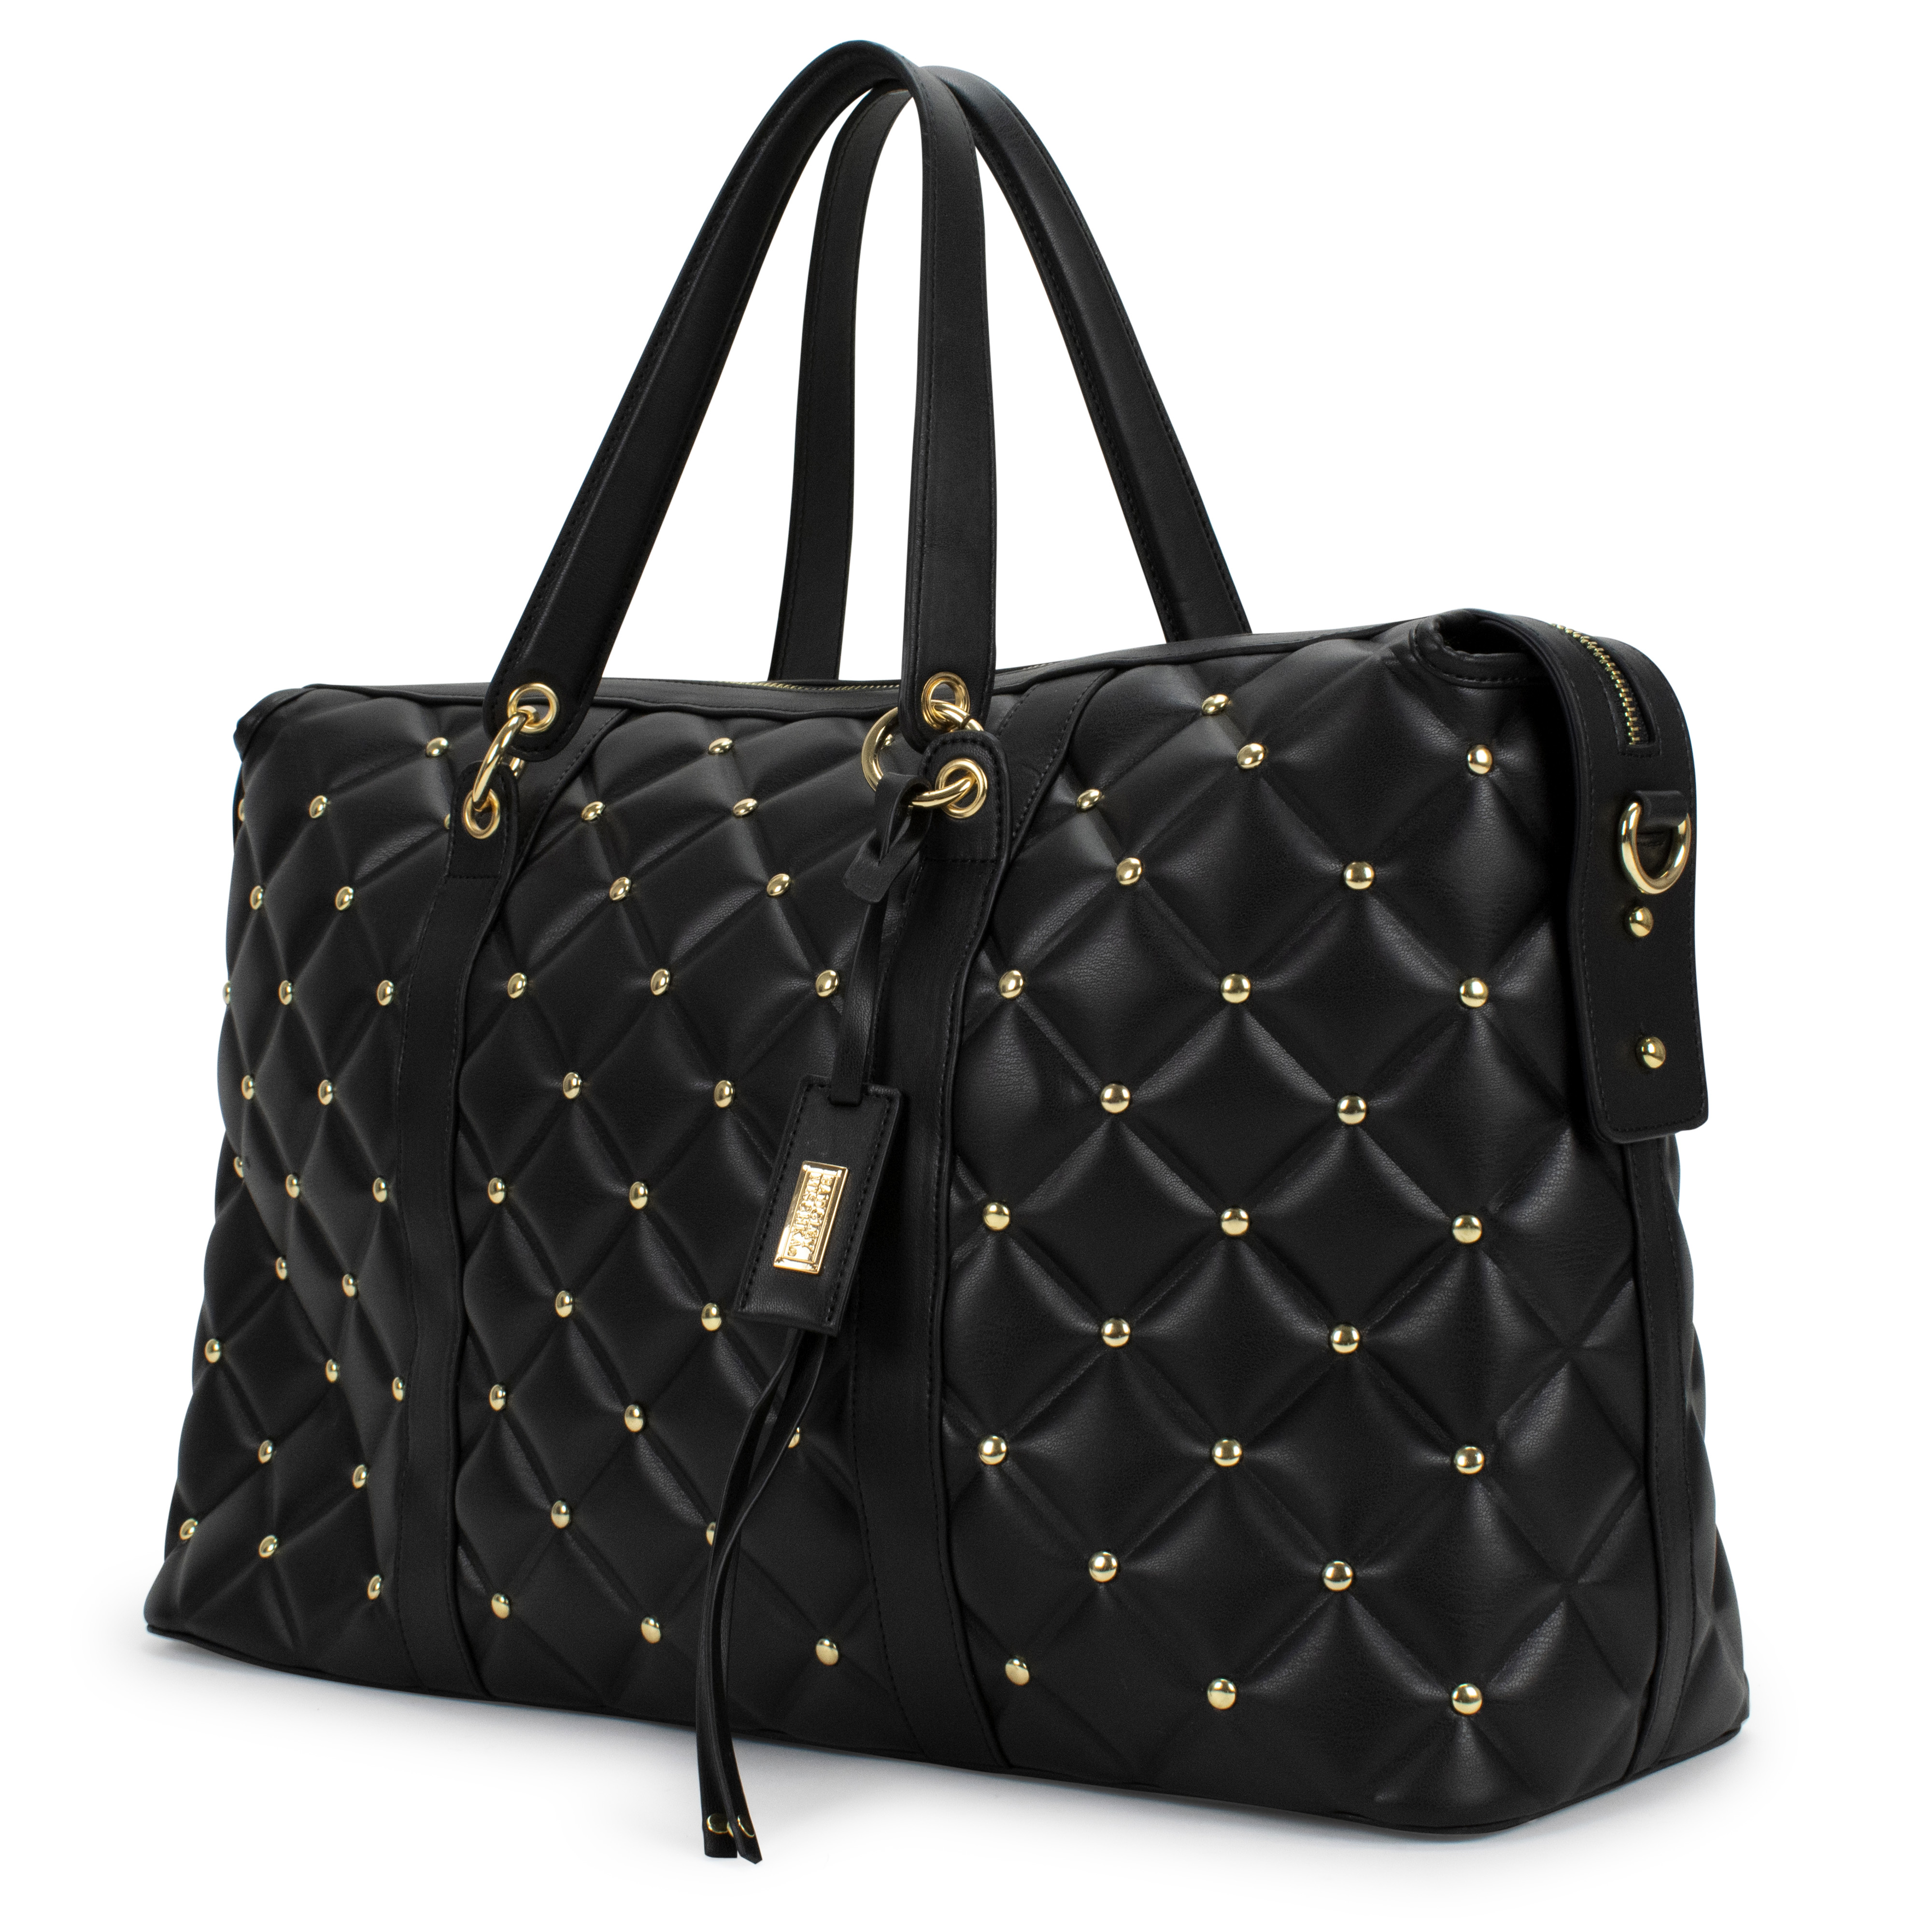 Reco Didi padded tote bag - ShopStyle